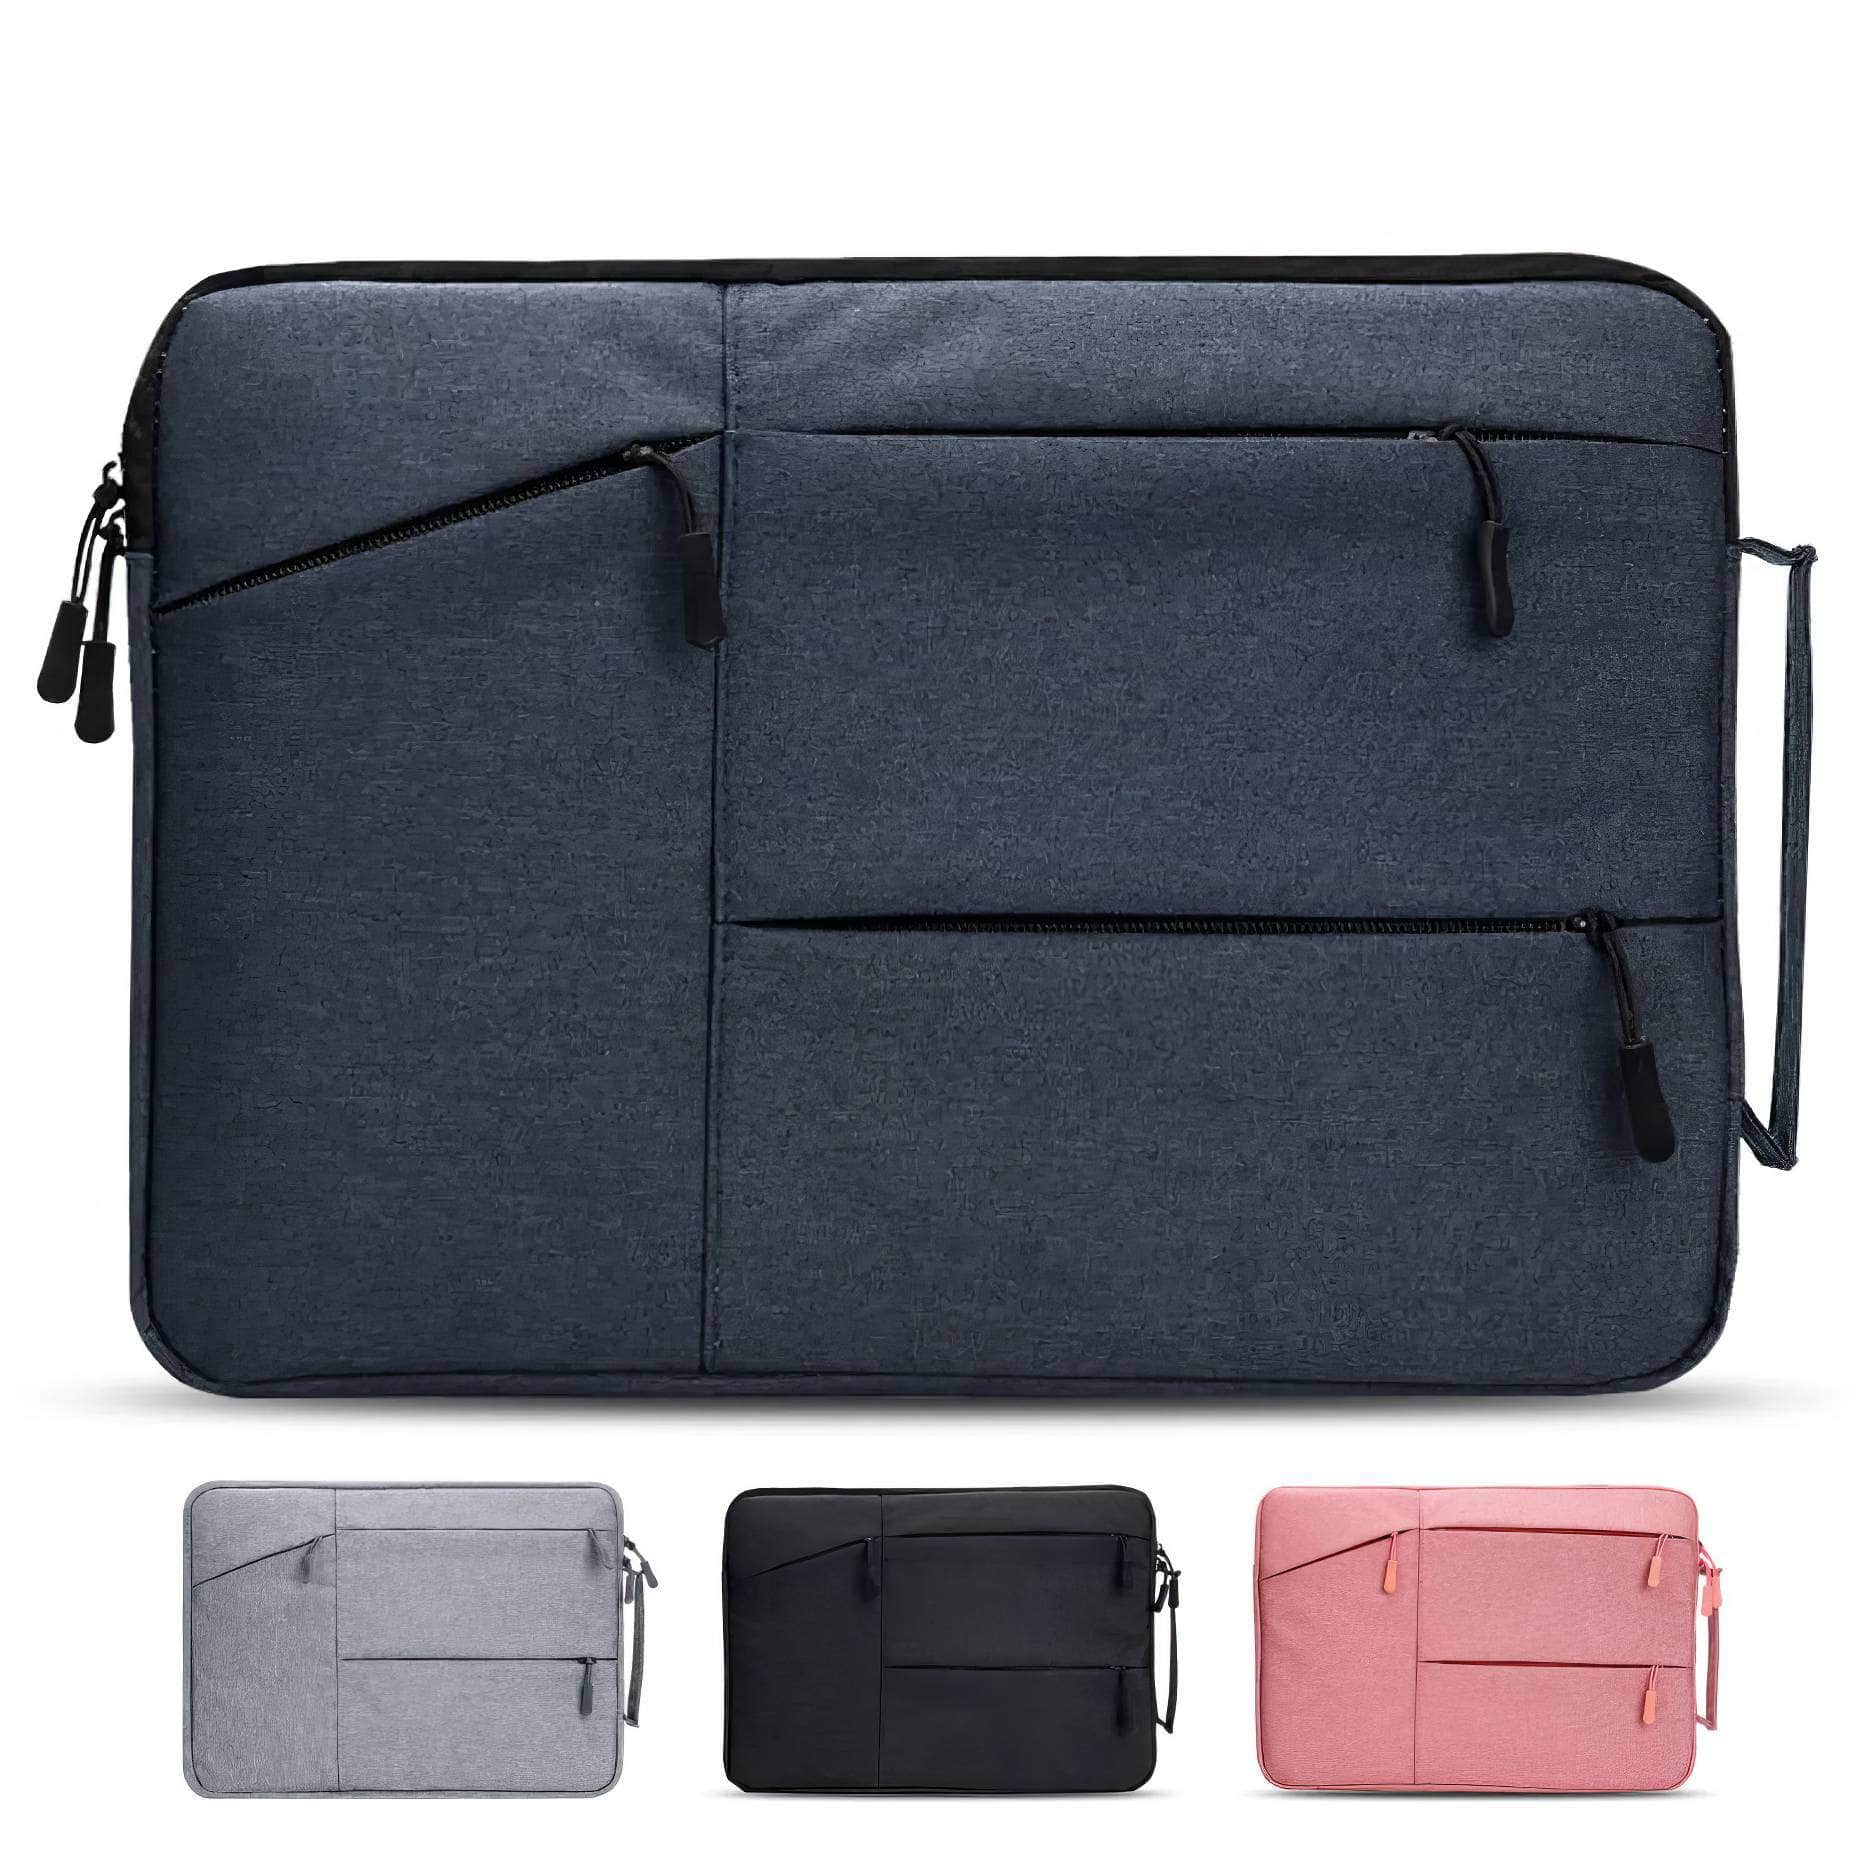 Laptop Bag PC Case 13-15.6 Inch Cover Sleeve for MacBook Air/Pro, Redmi, Macbook M1